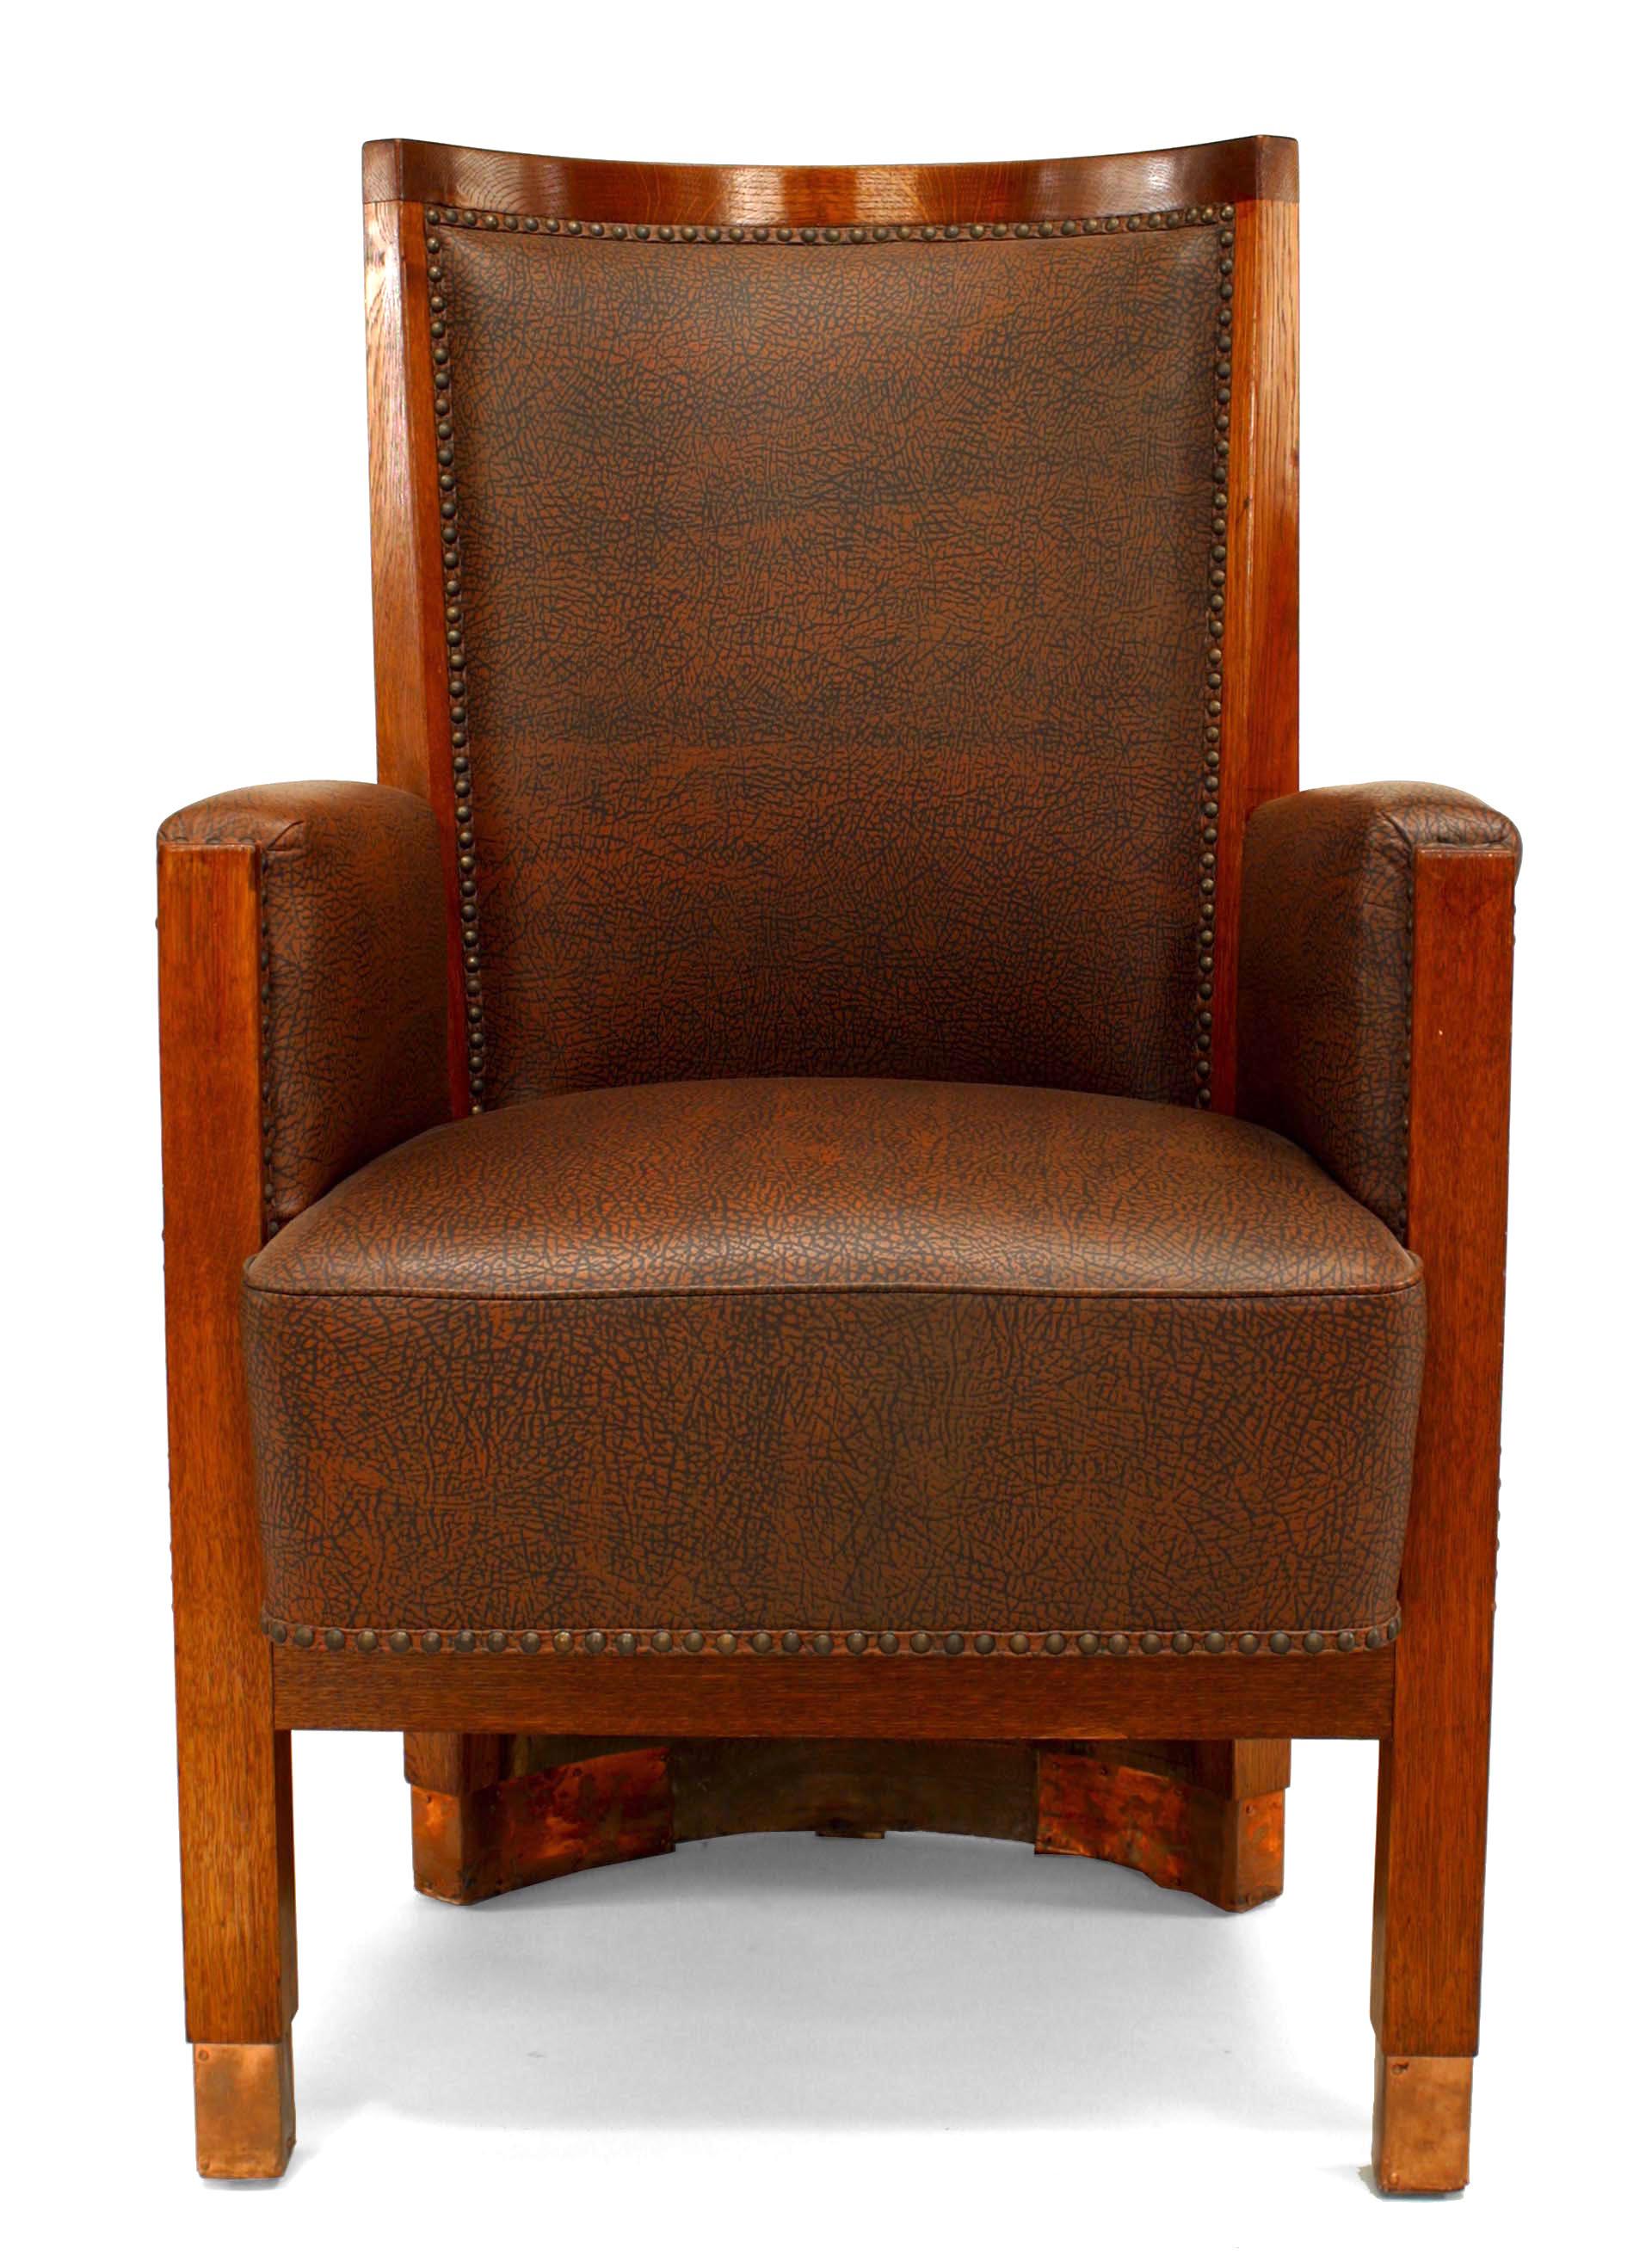 Three American Mission style (19th-20th century) stained oak barrel back armchairs with solid wood back and copper trim with leather upholstered seat and back (Priced Each).
  